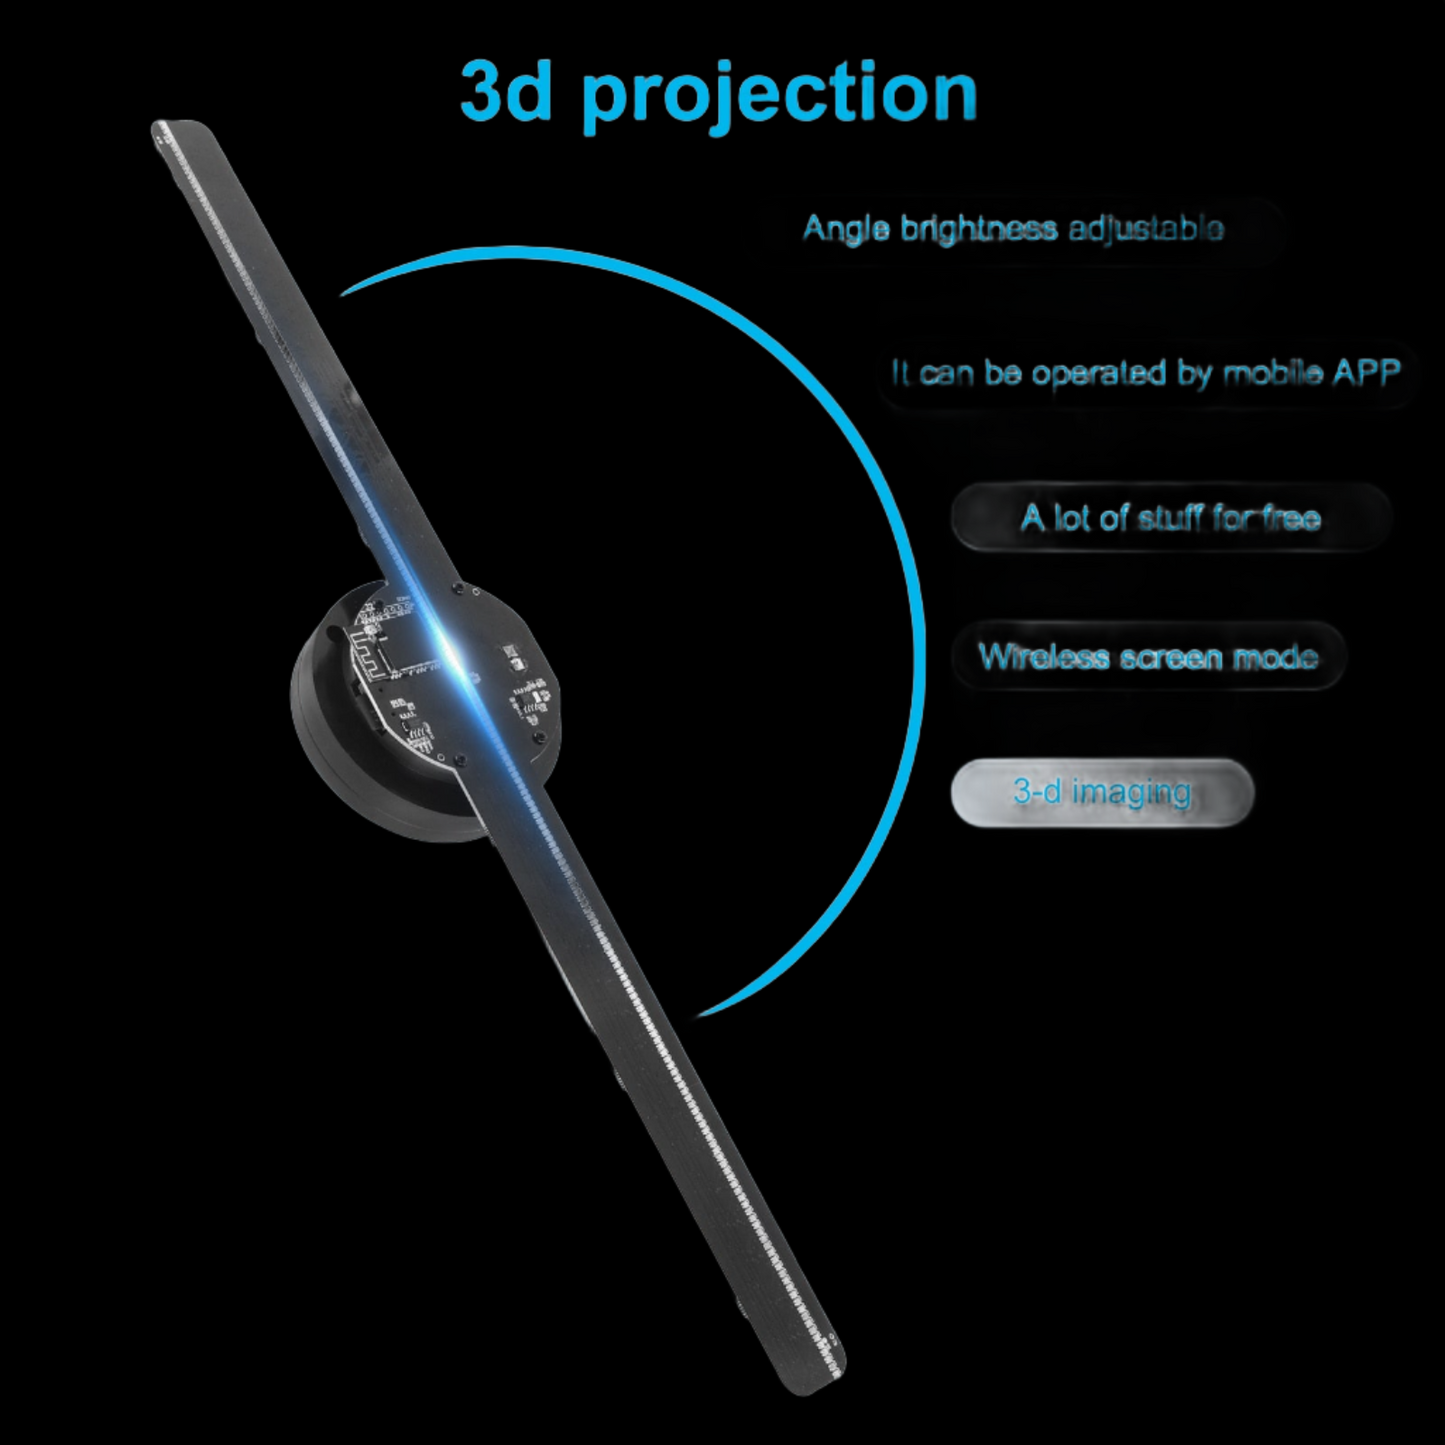 Dual Blade 3D Hologram Fan (Get 40% Off On This Model)